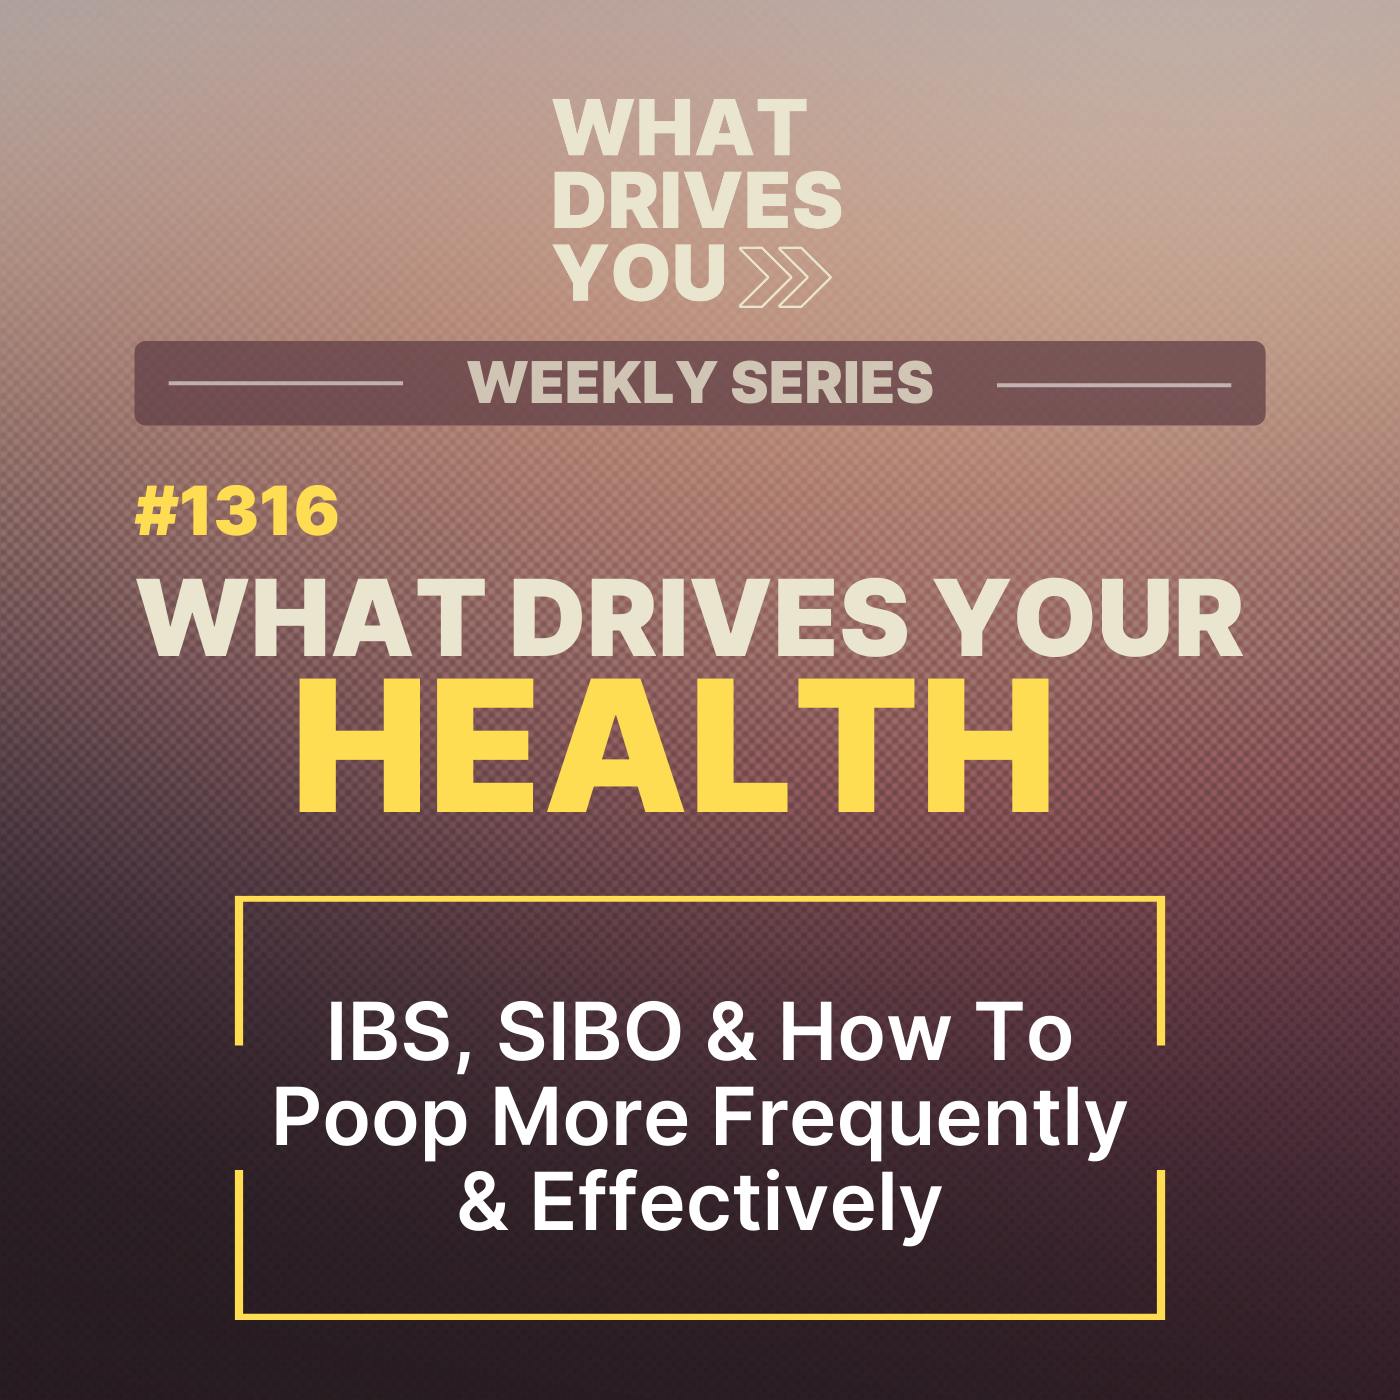 What Drives Your Health | IBS, SIBO & How To Poop More Frequently & Effectively